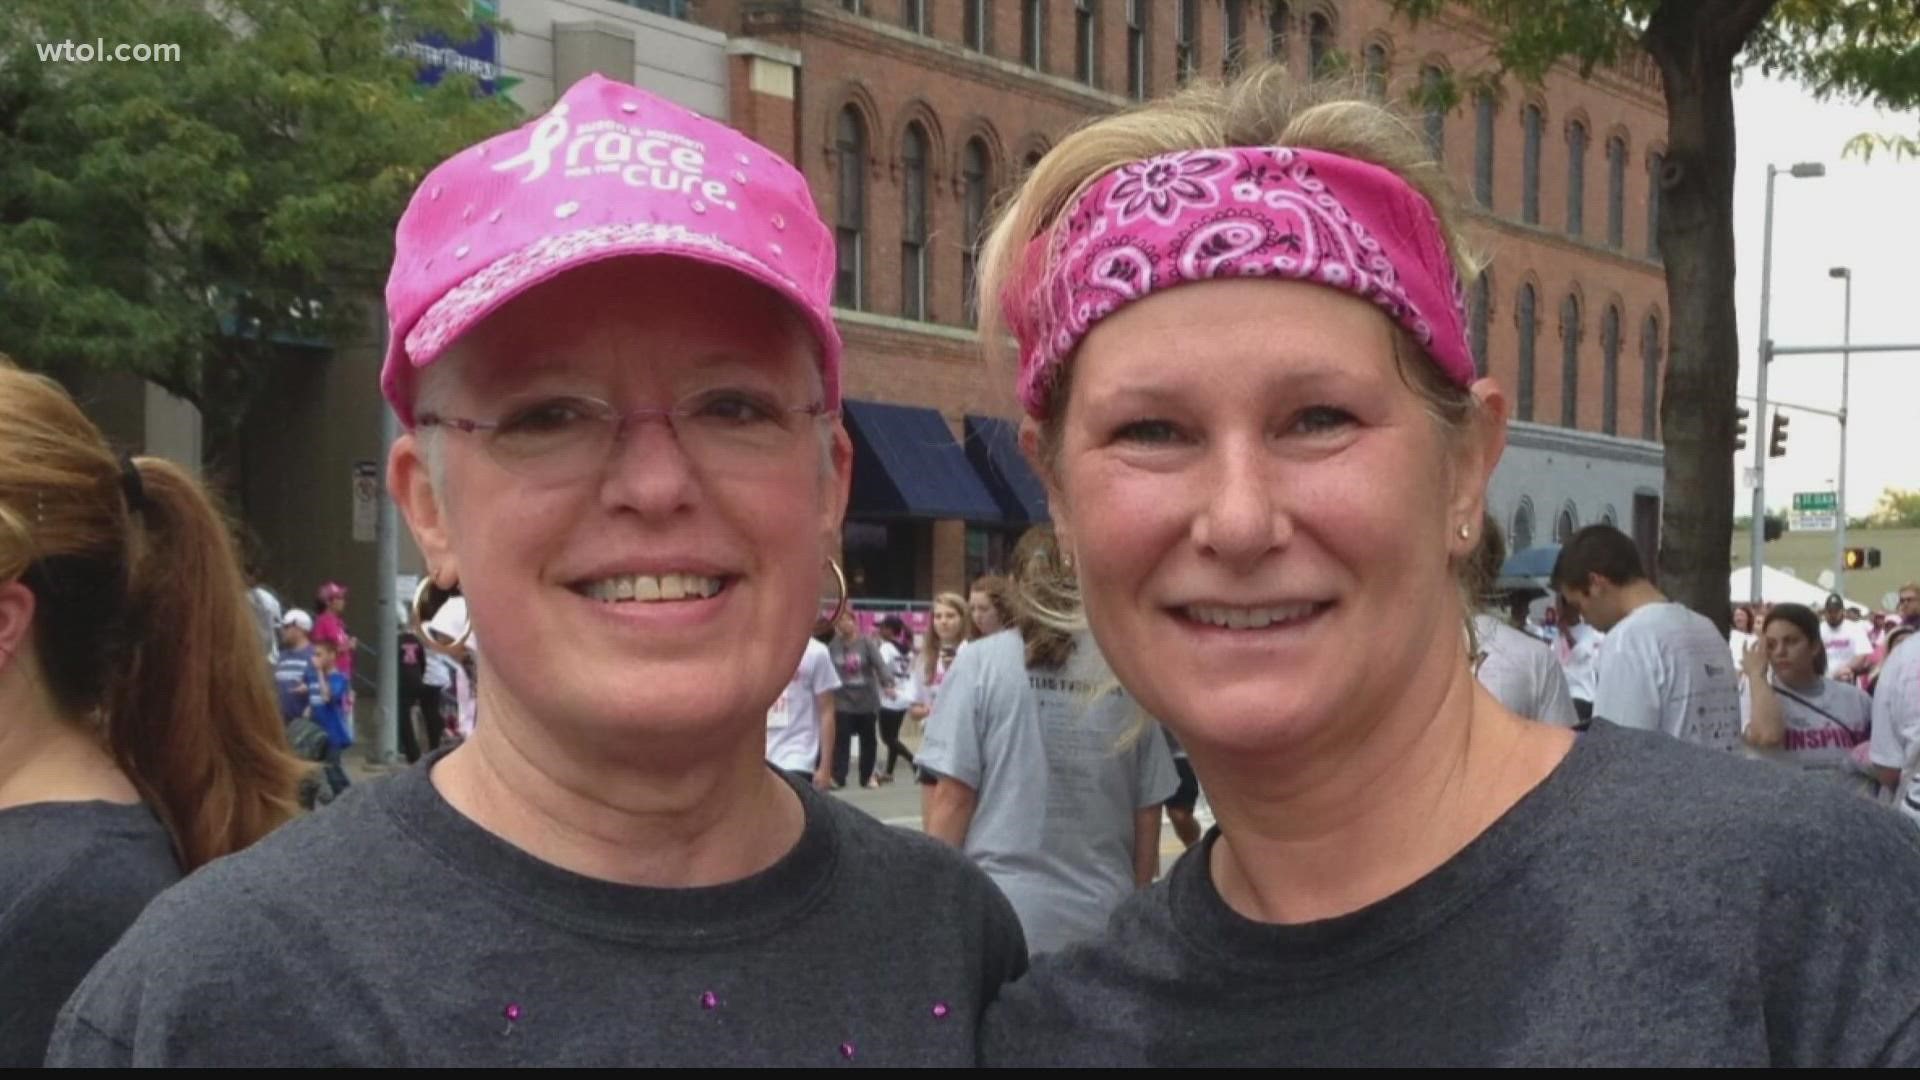 Toledo's RFTC celebrates Dr. Marilyn Agee, who has patiently guided many women through a breast cancer diagnosis and now has shared that experience as a survivor.